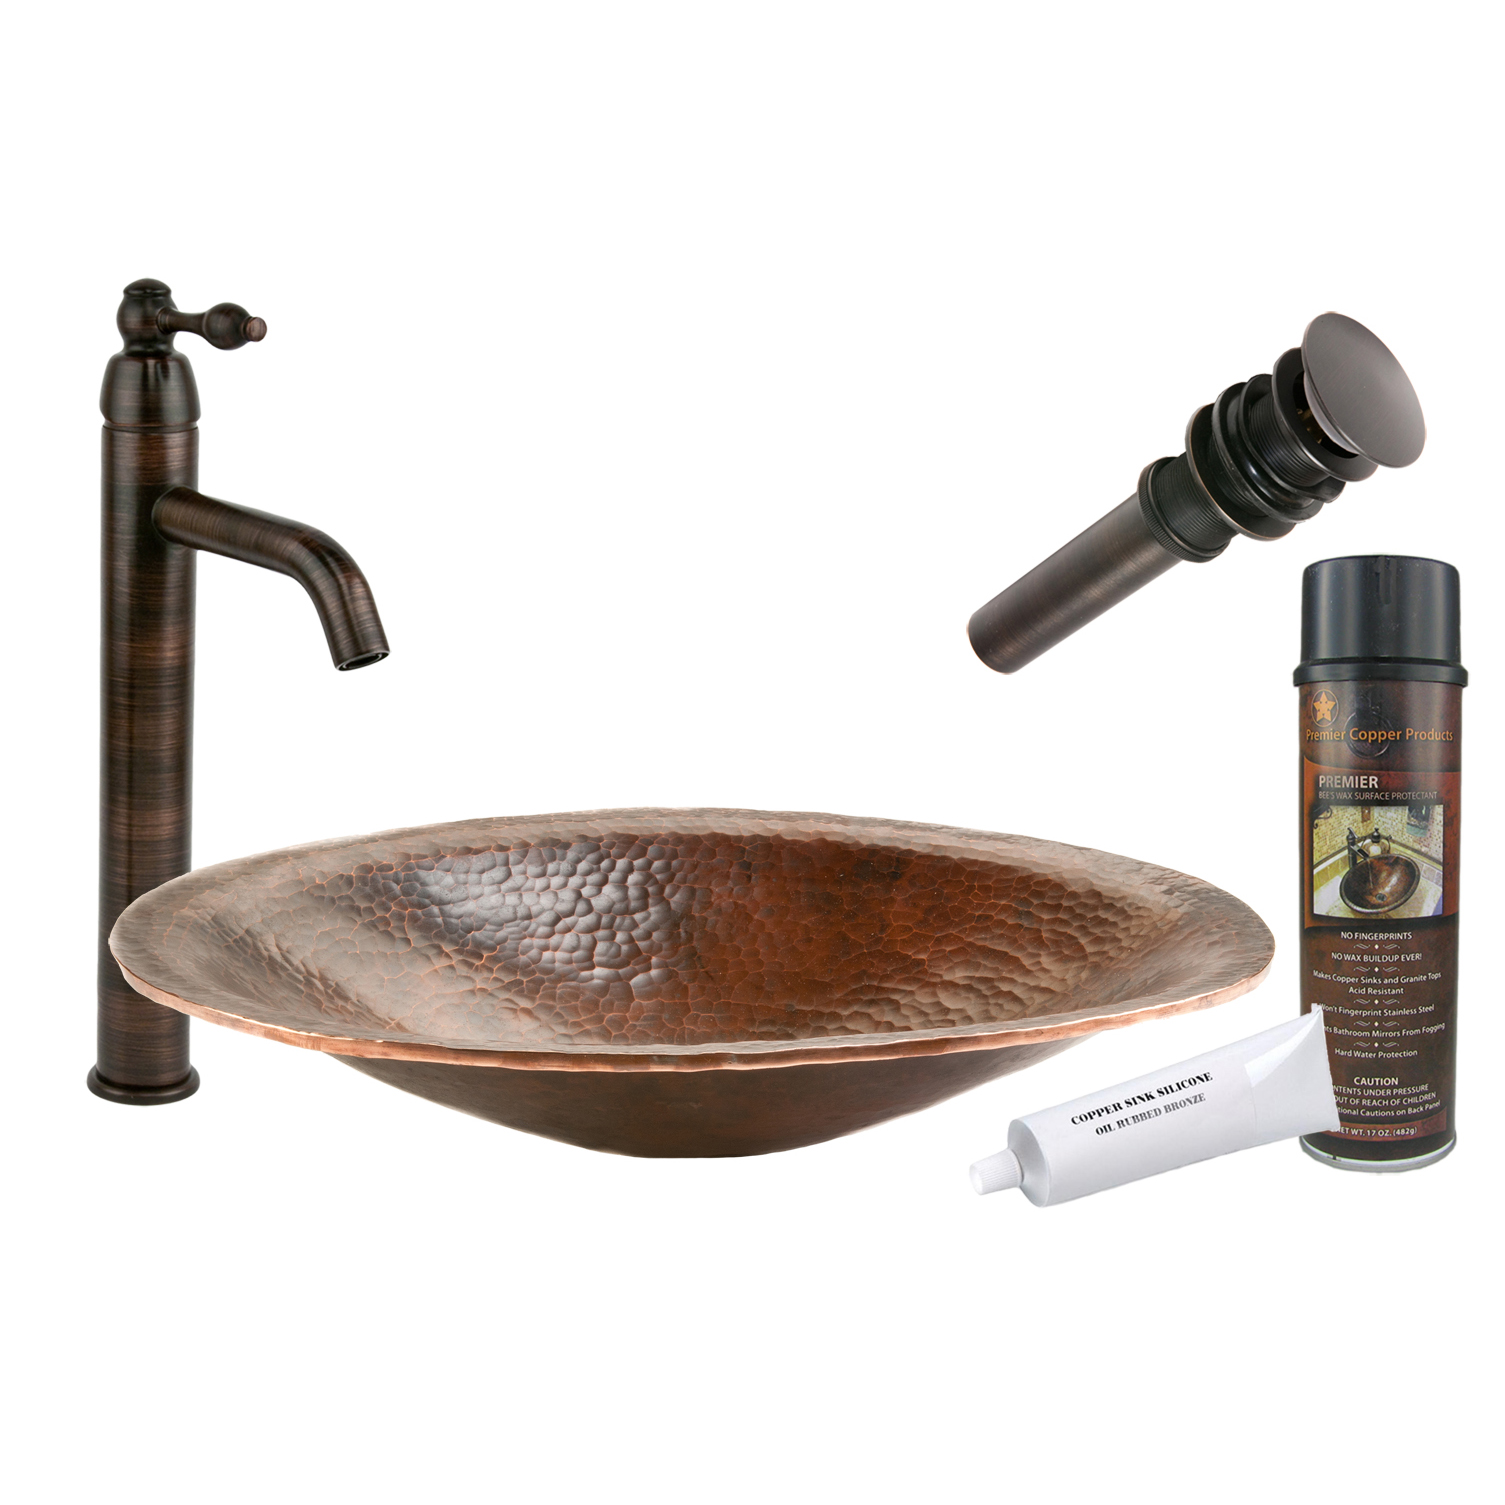 Oval Hand Forged Old World Copper Vessel Sink, Faucet And Accessories Package, Oil Rubbed Bronze